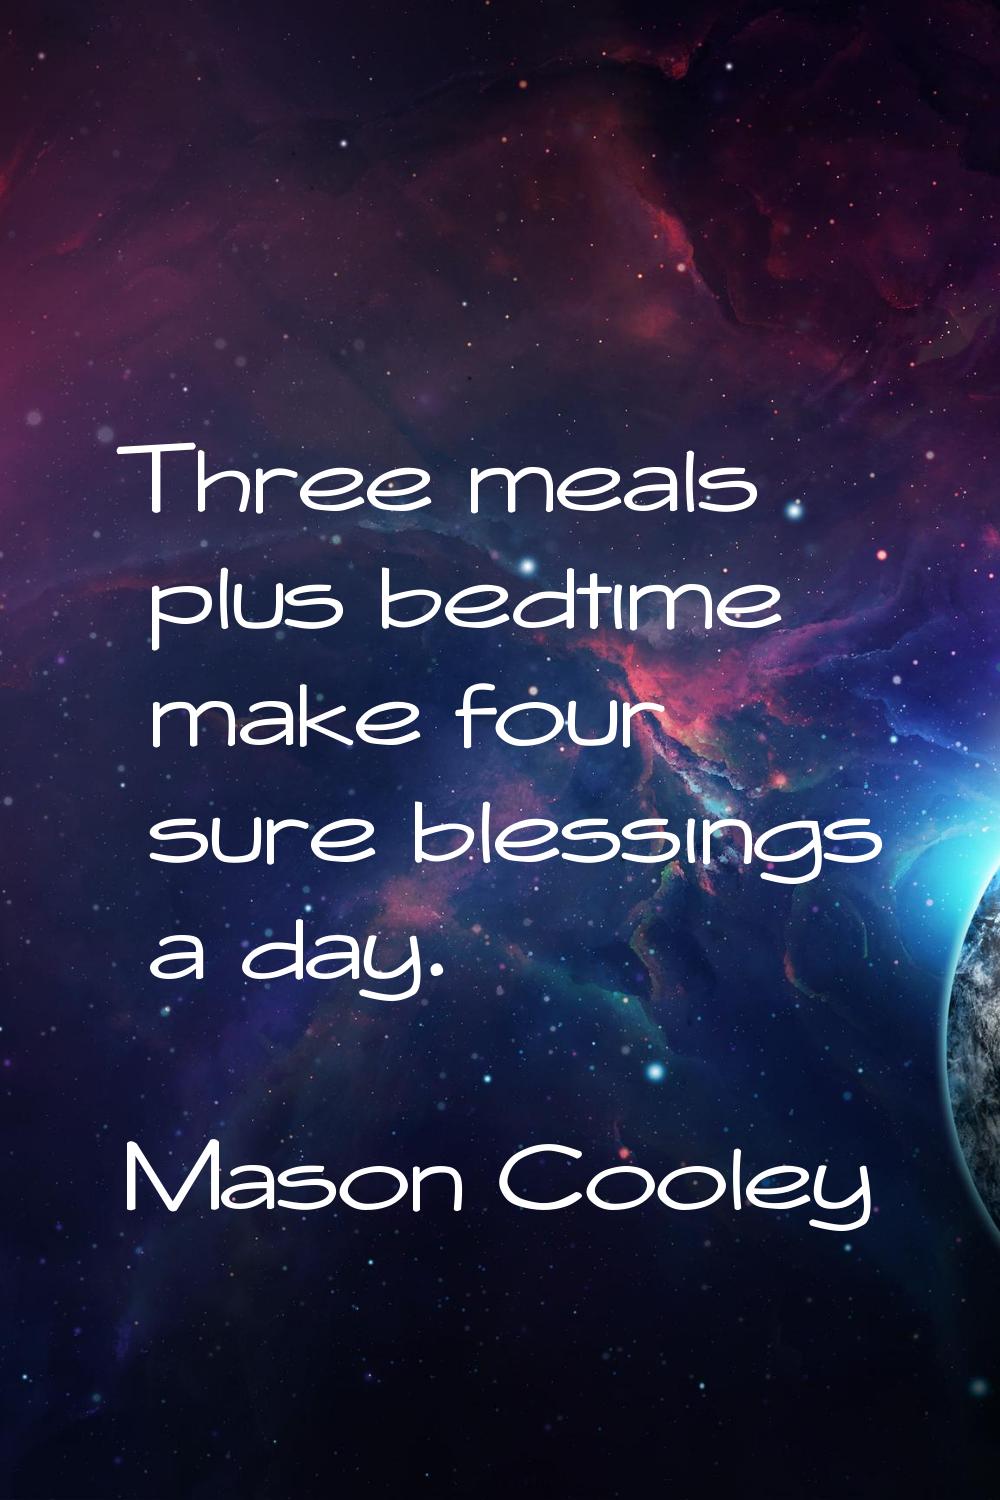 Three meals plus bedtime make four sure blessings a day.